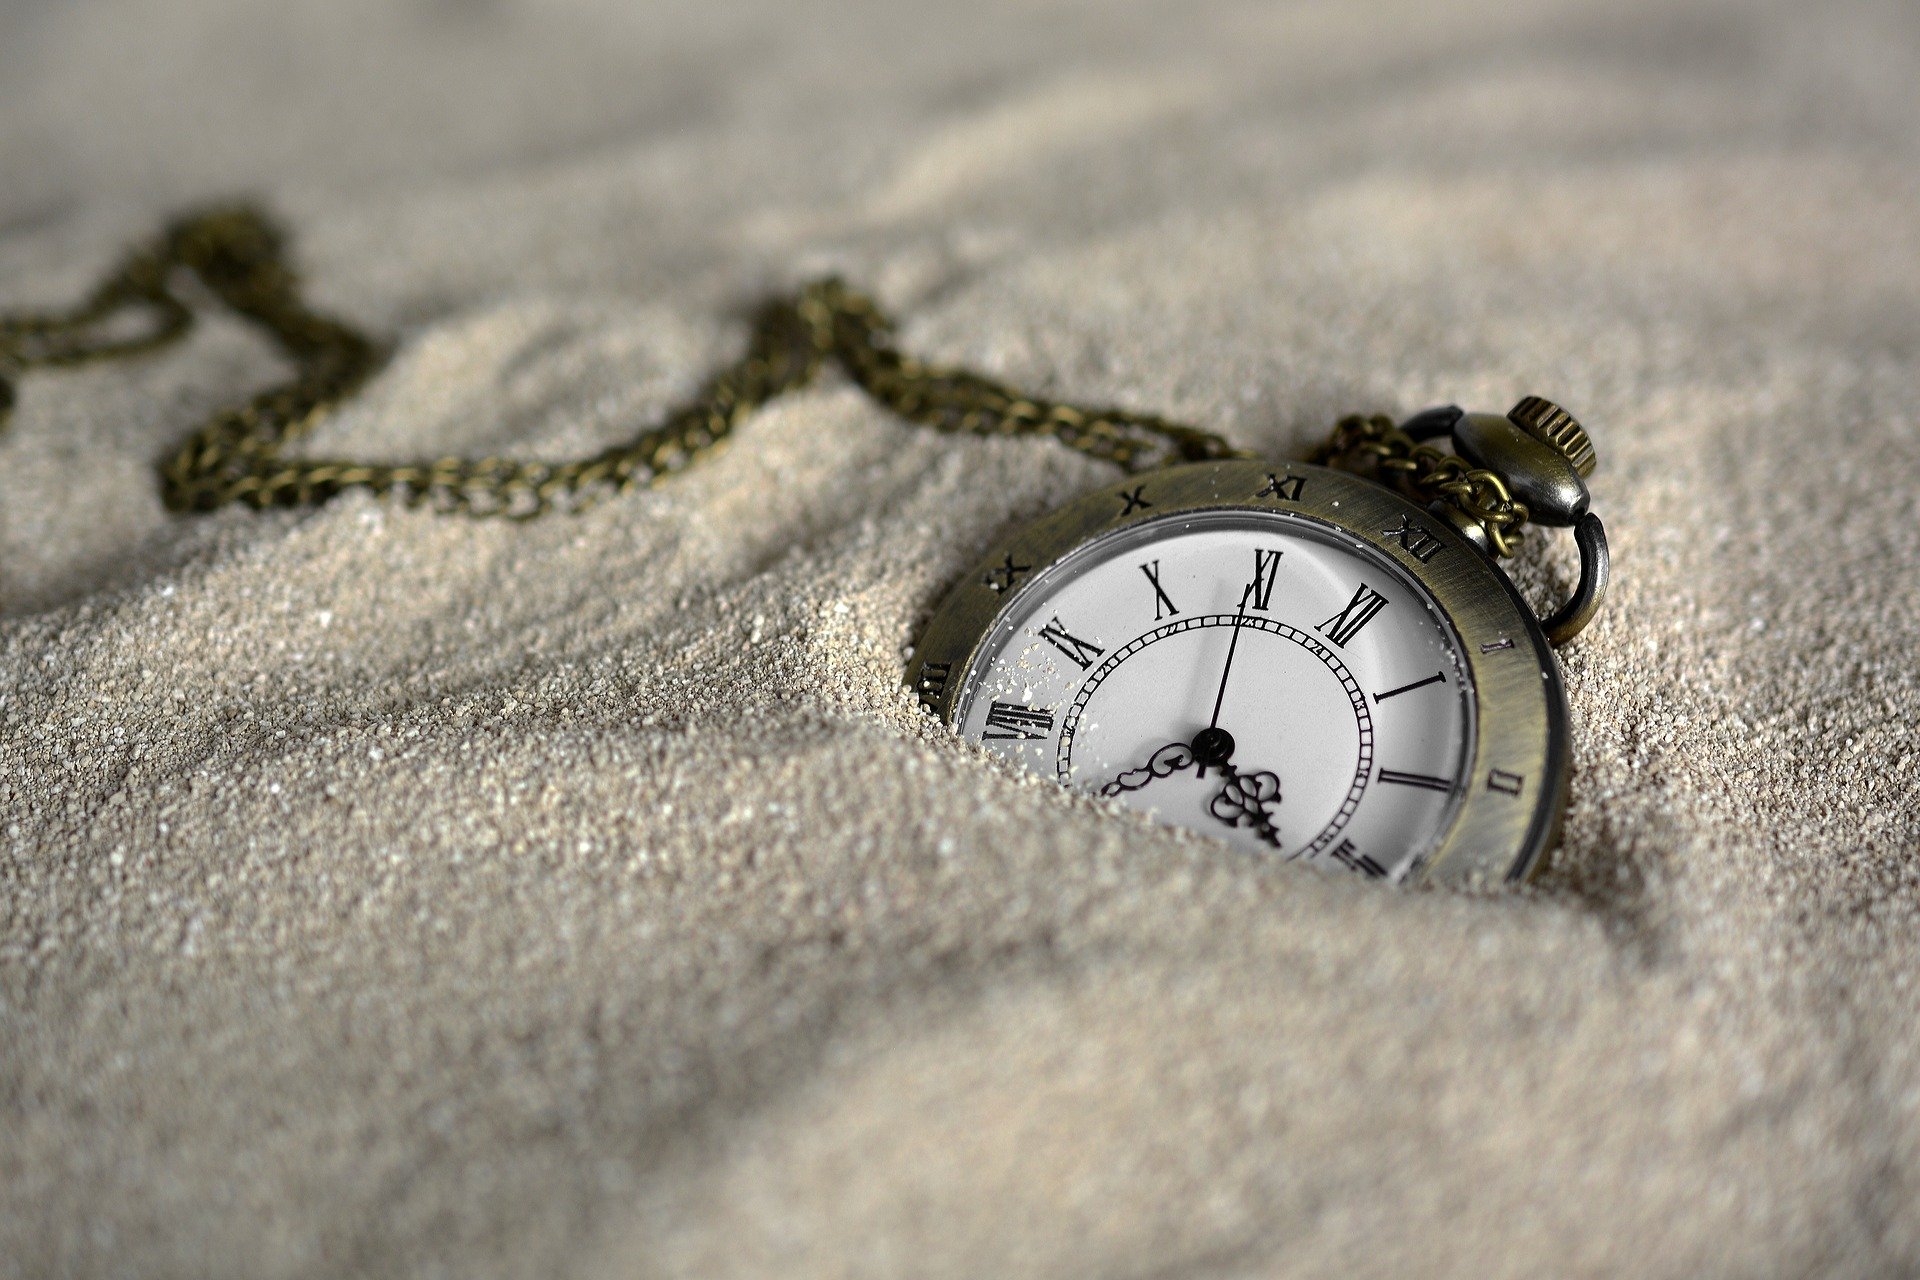 A time piece half covered in sand